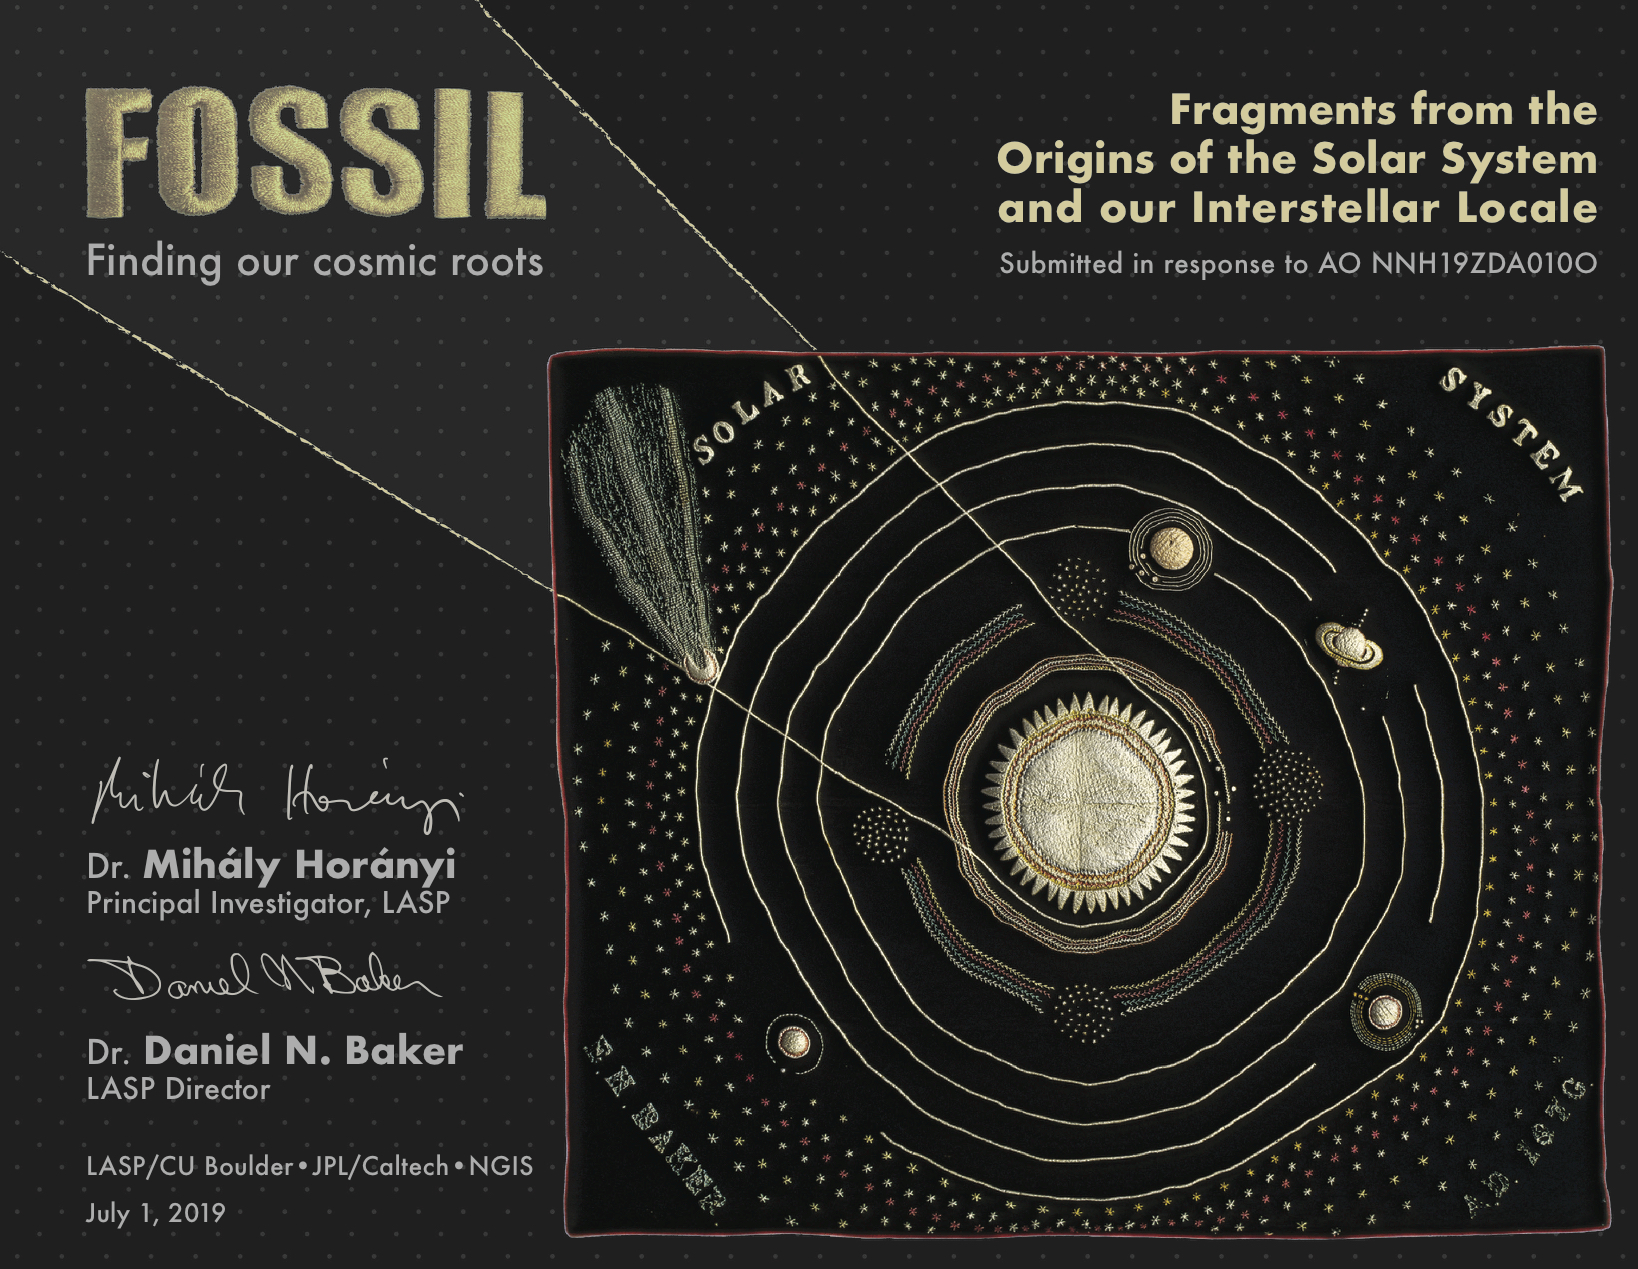 FOSSIL mission poster